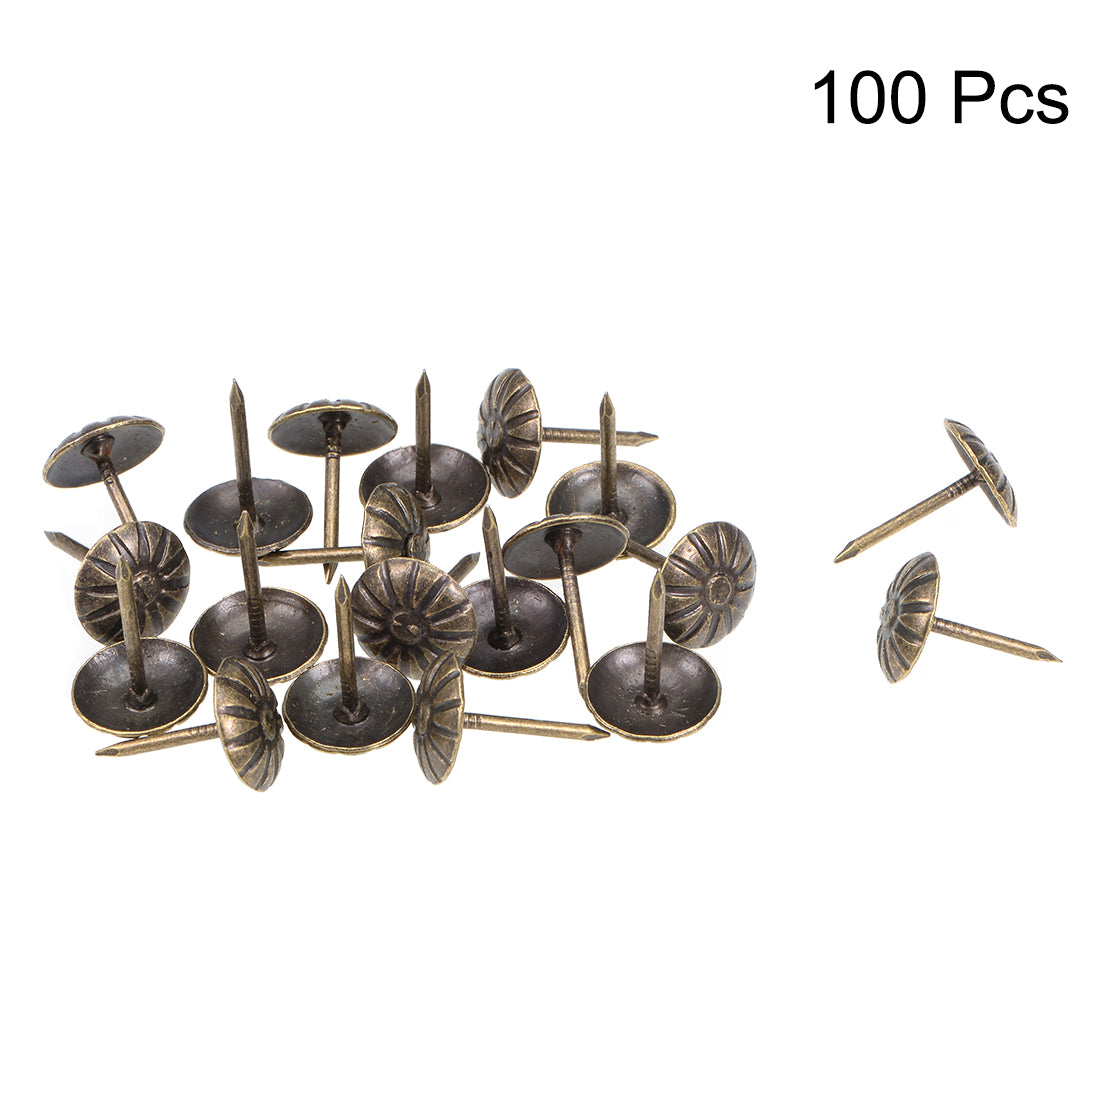 uxcell Uxcell Upholstery Nails Tack 11mm Head Dia Antique Round Thumb Push Pins Bronze Tone 100 Pcs